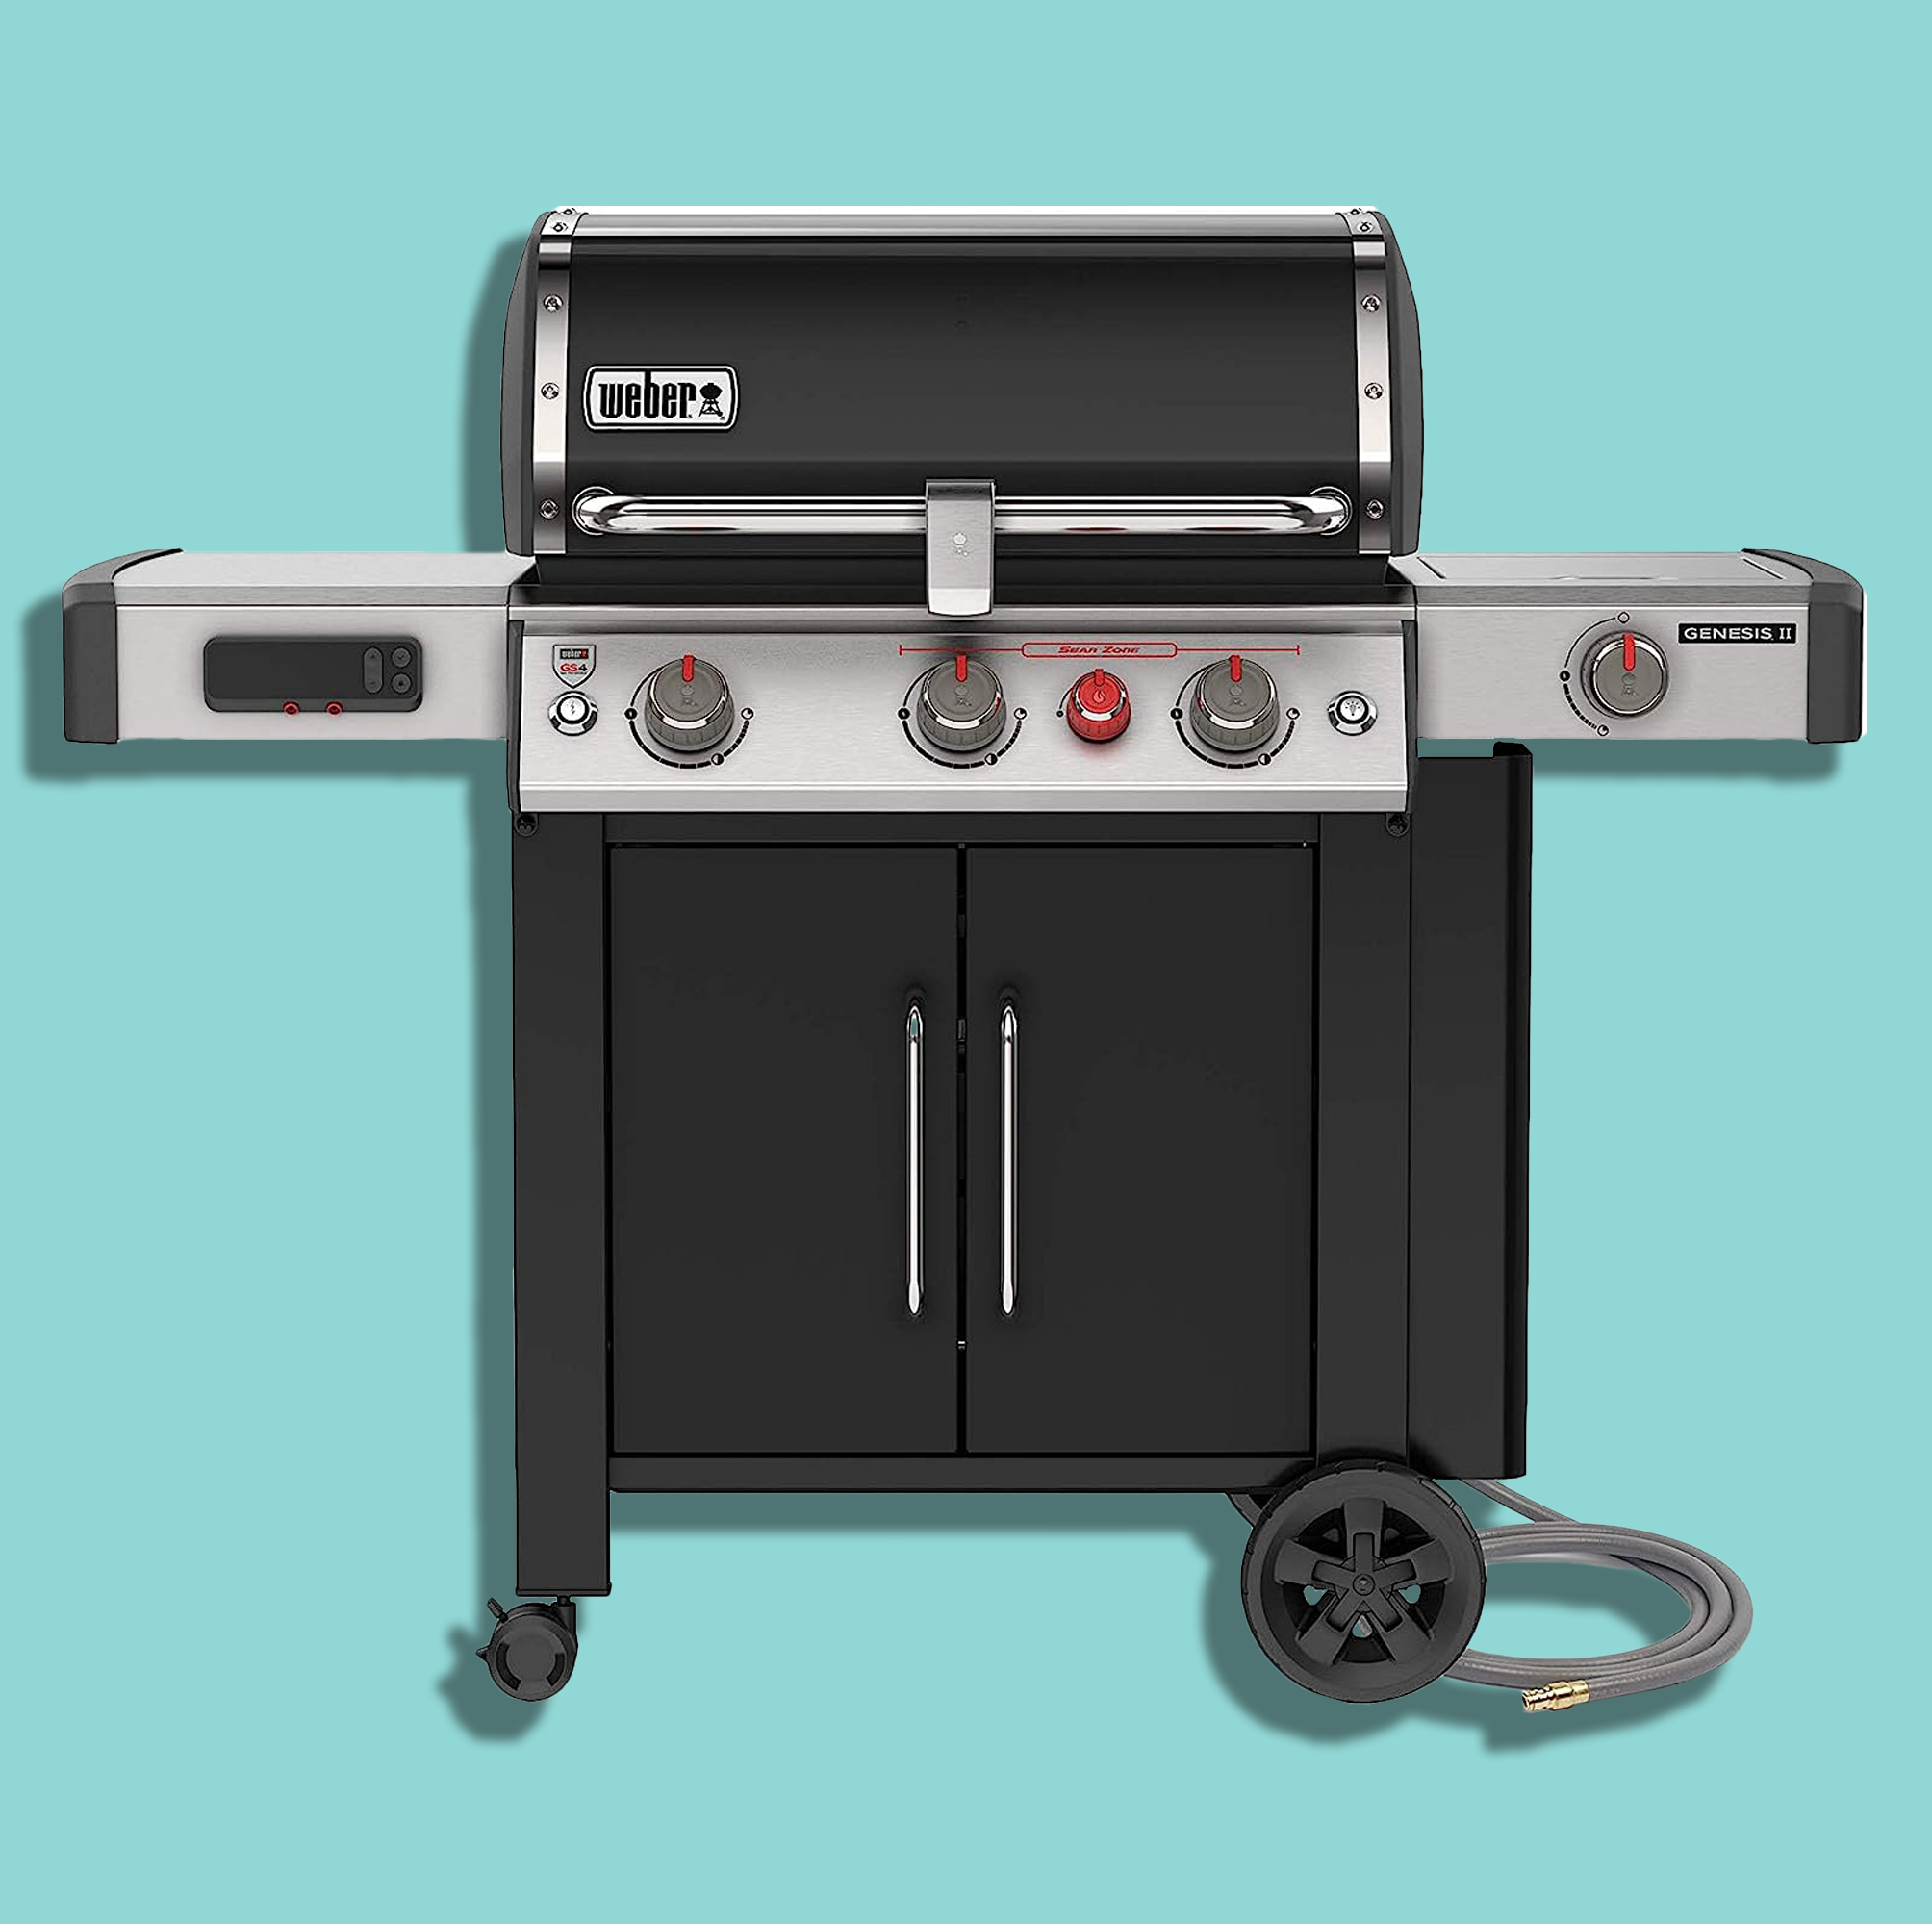 The Best Grills for Barbecuing